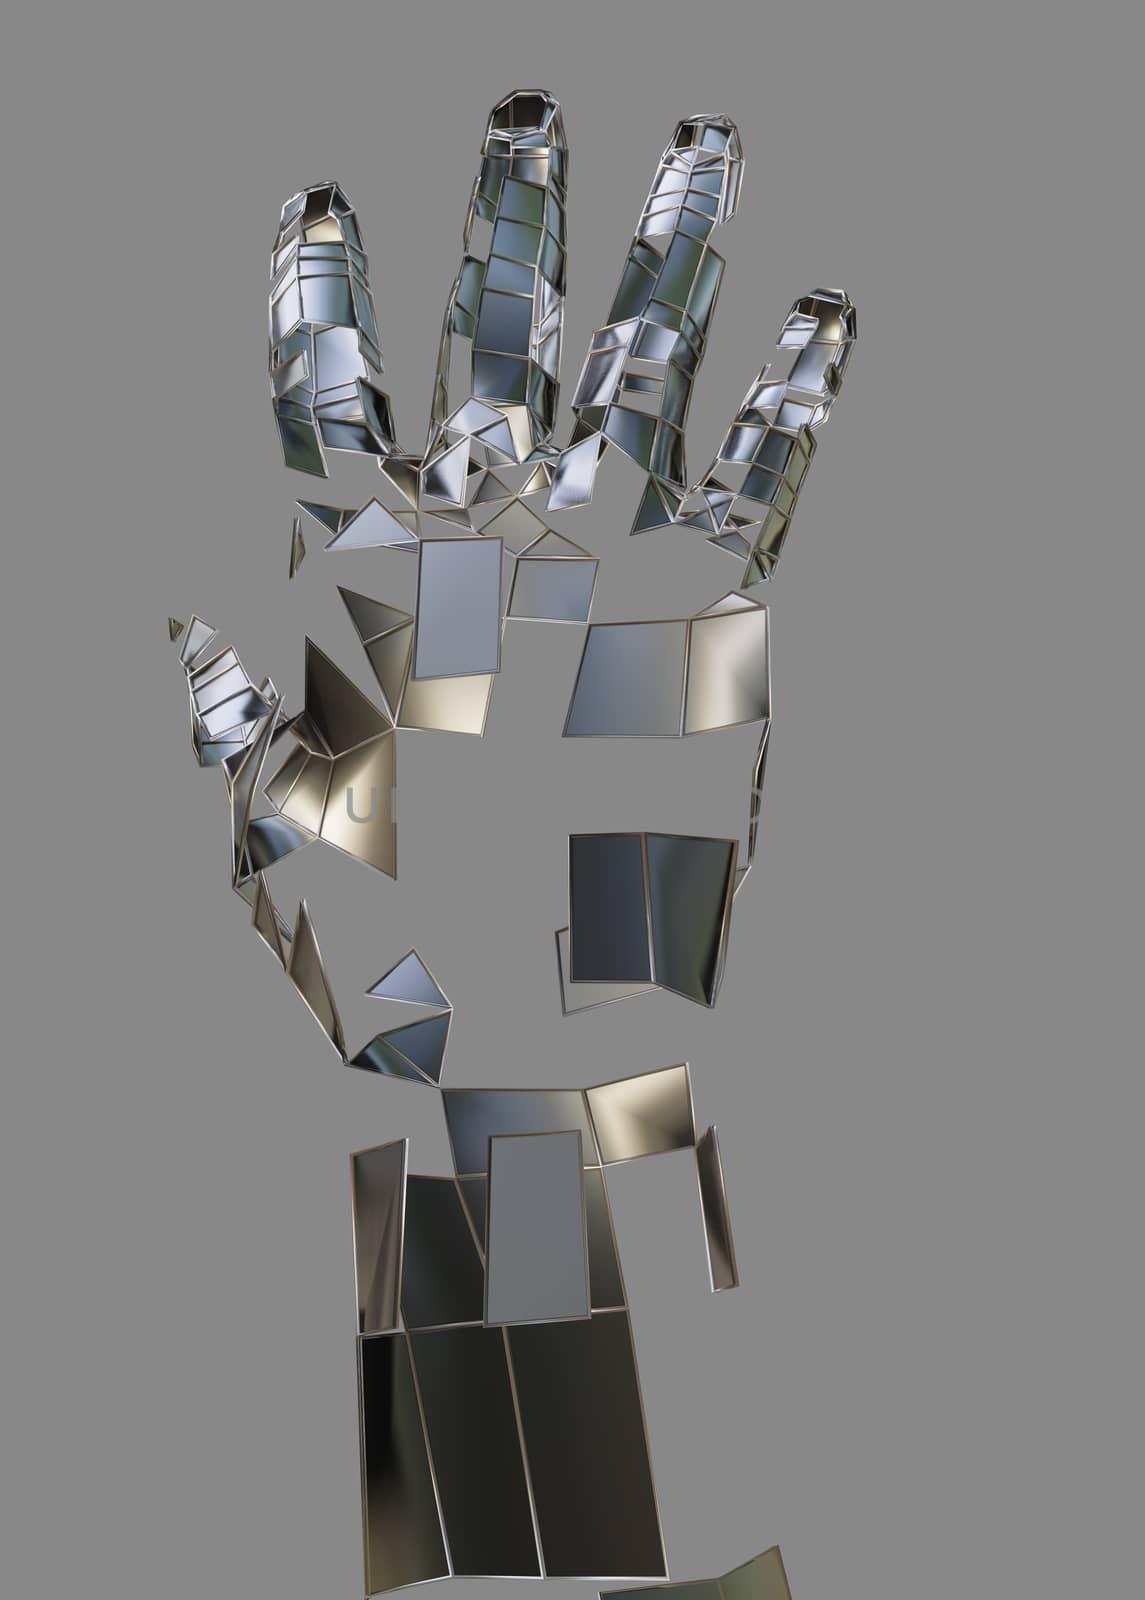 Abstract robot hand. Metal hand on grey background. 3D illustration